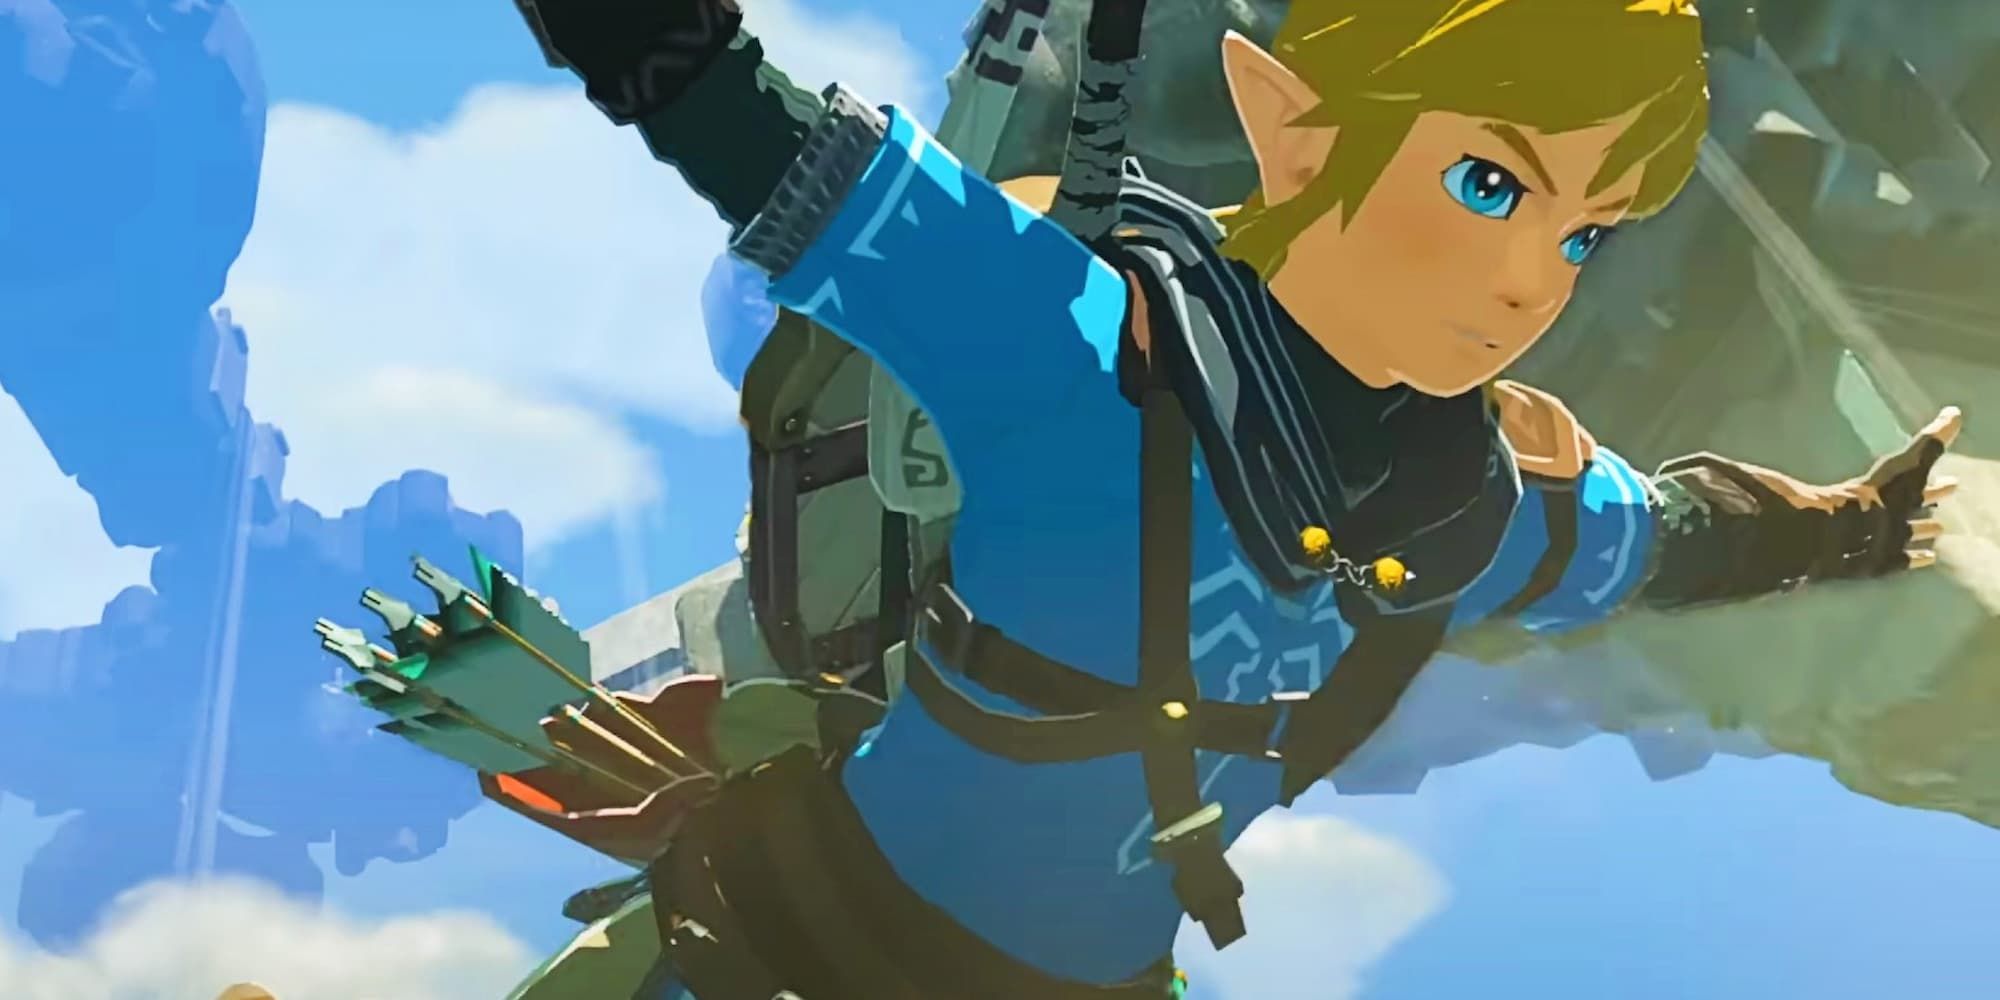 Link falls through the sky with floating platforms behind him in a trailer image from The Legend of Zelda: Tears of the Kingdom.